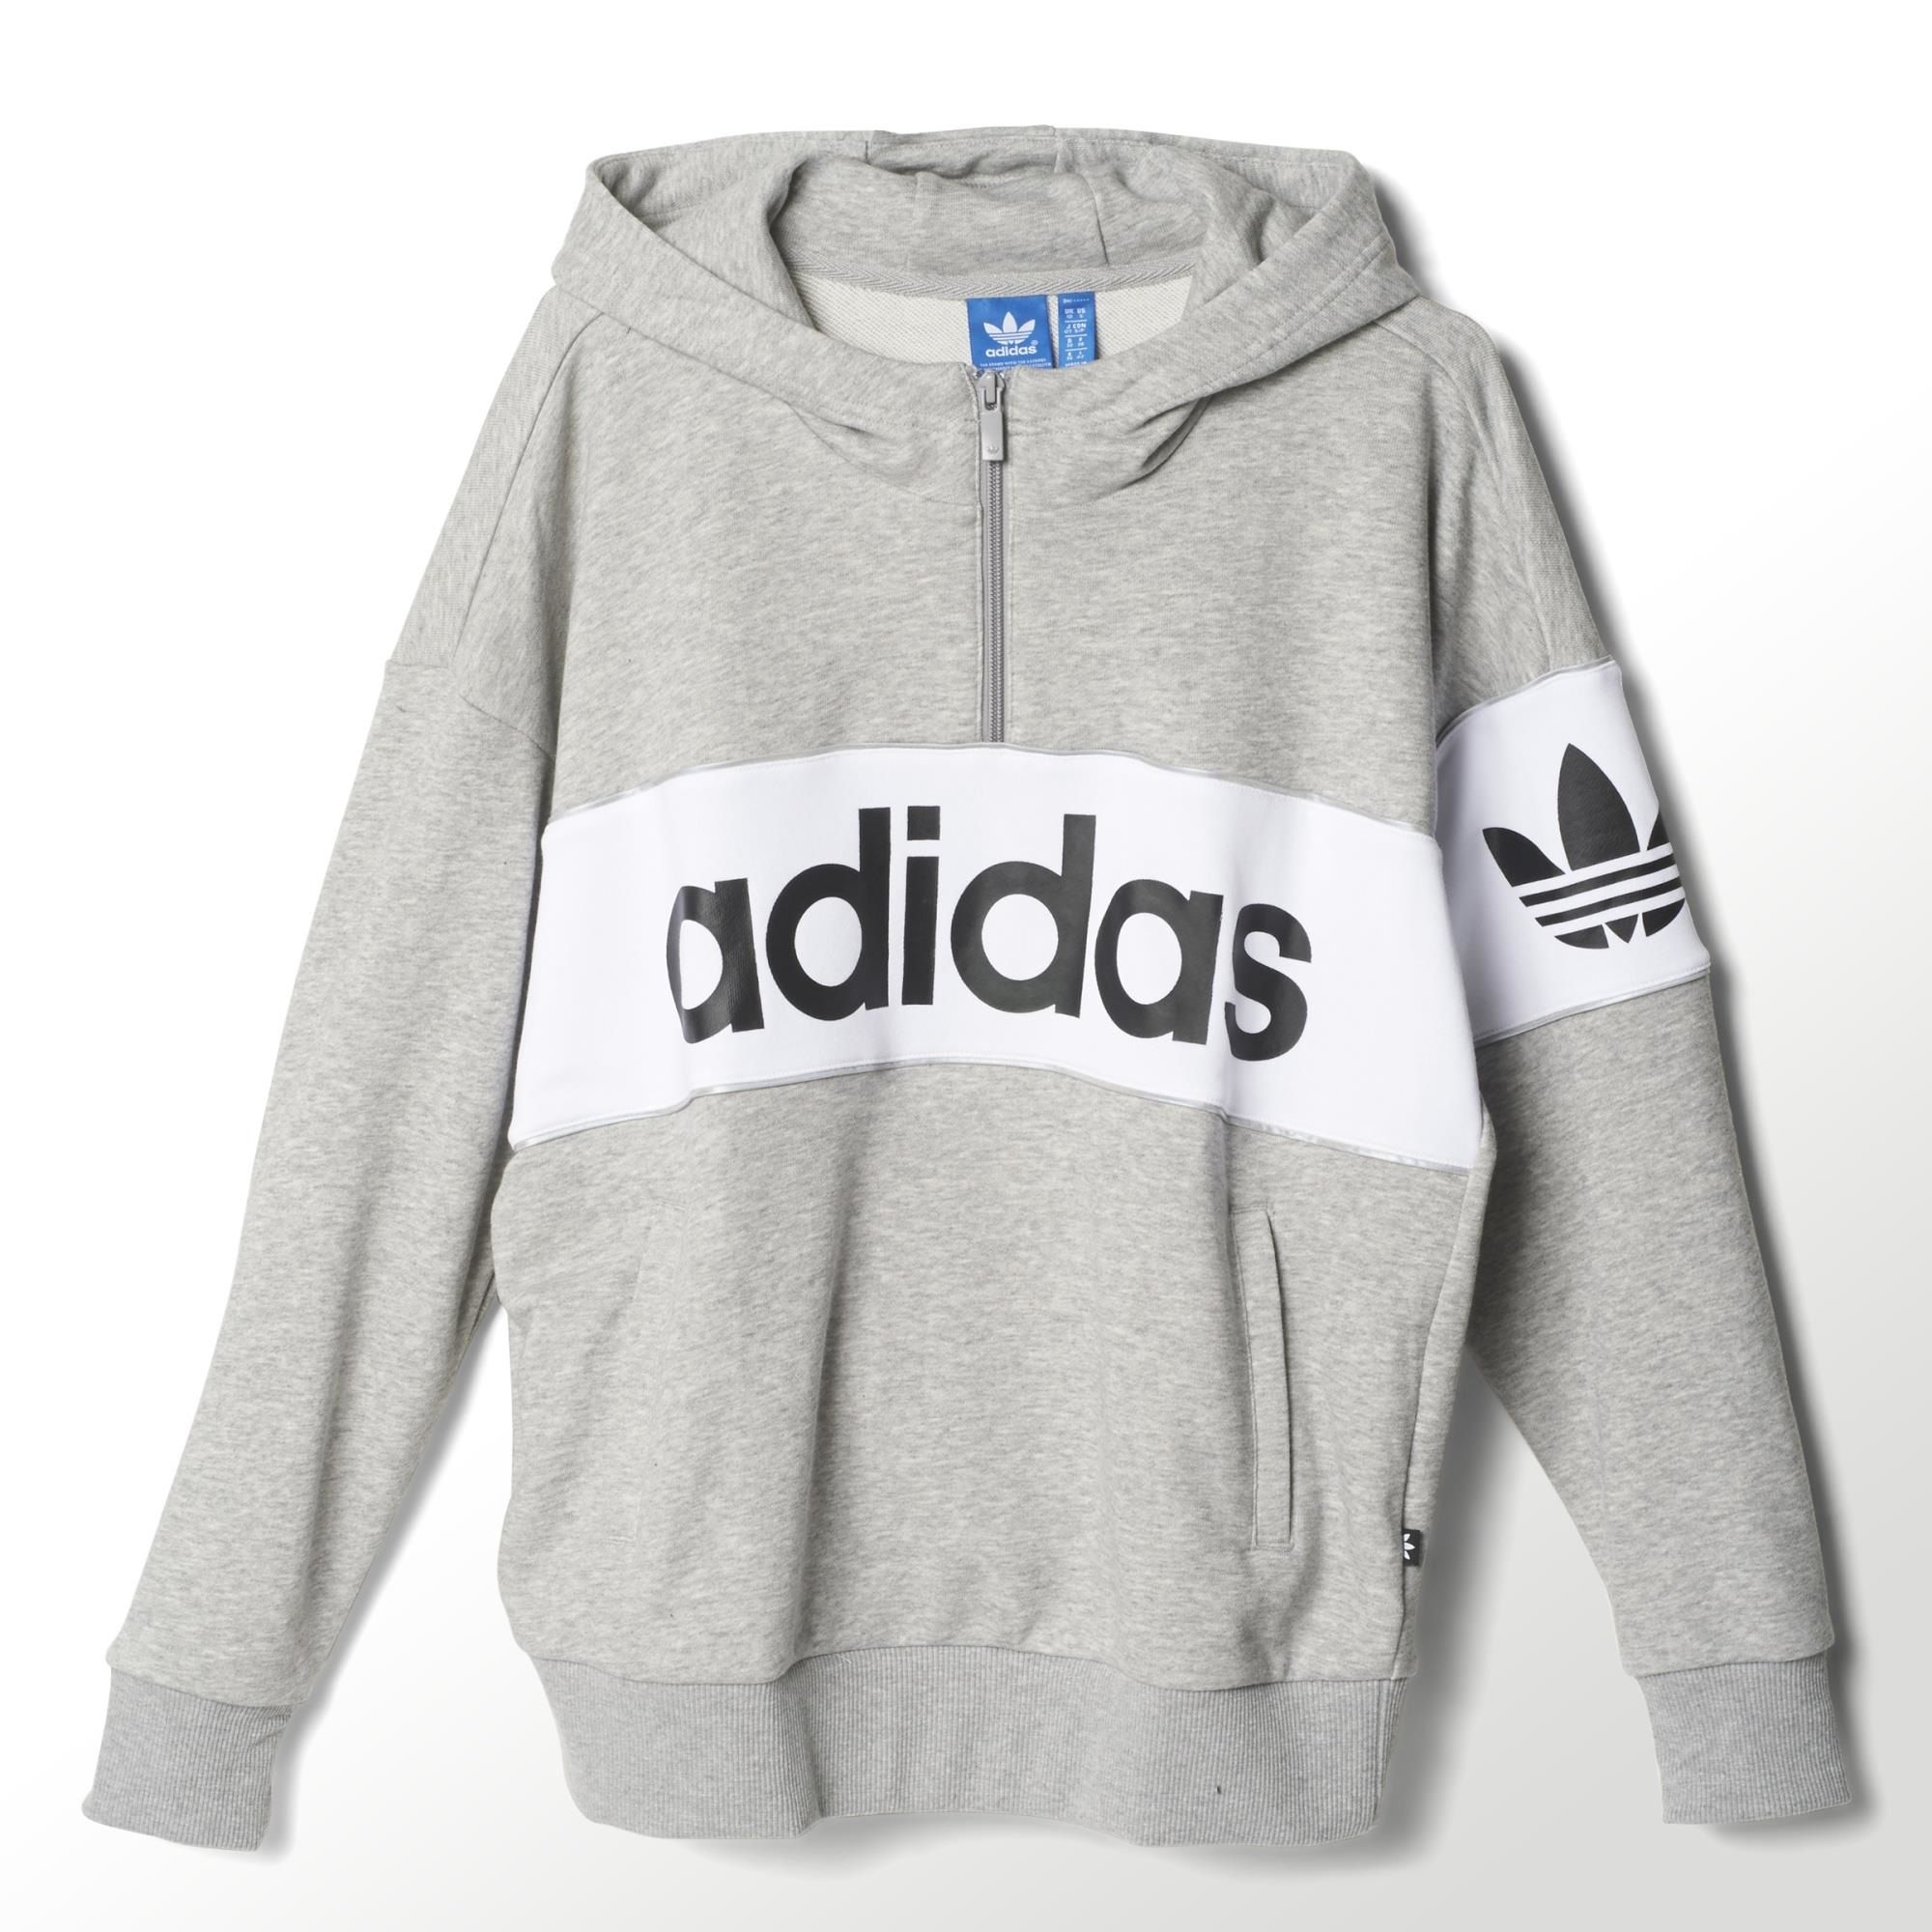 sudadera adidas mujer gris y rosa for sale a60d0 b0732